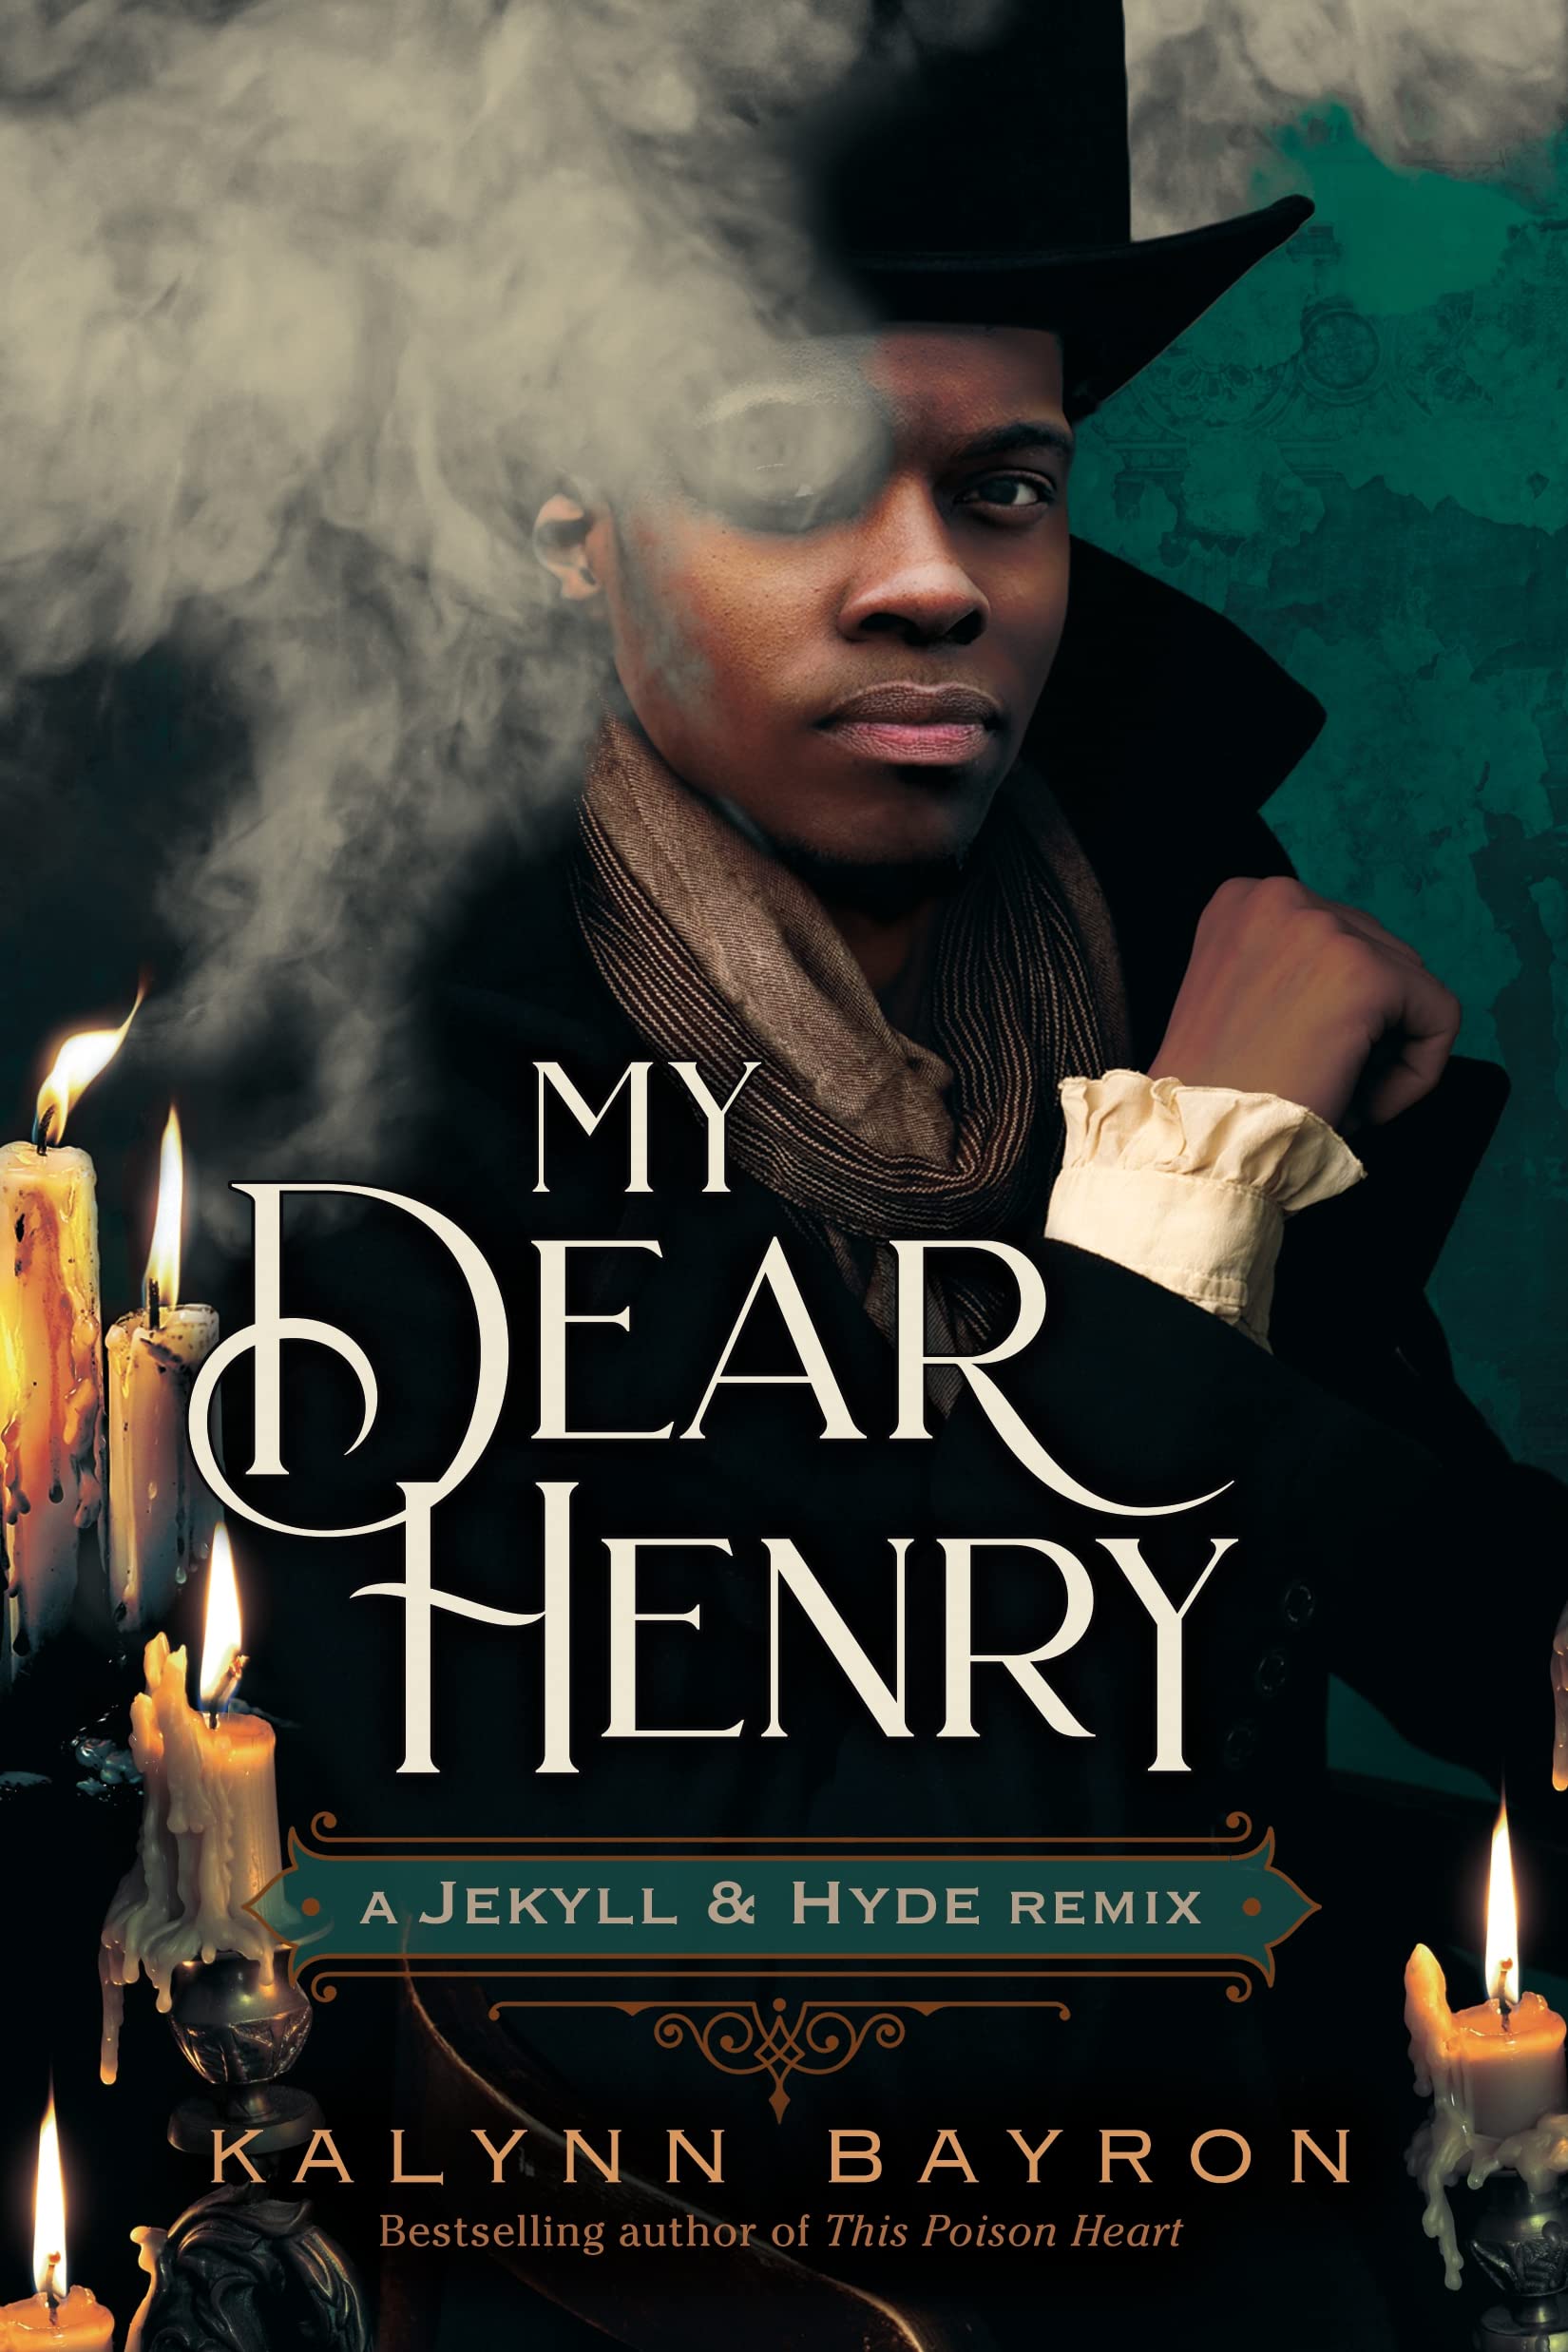 The main book cover for a book pulled by genre